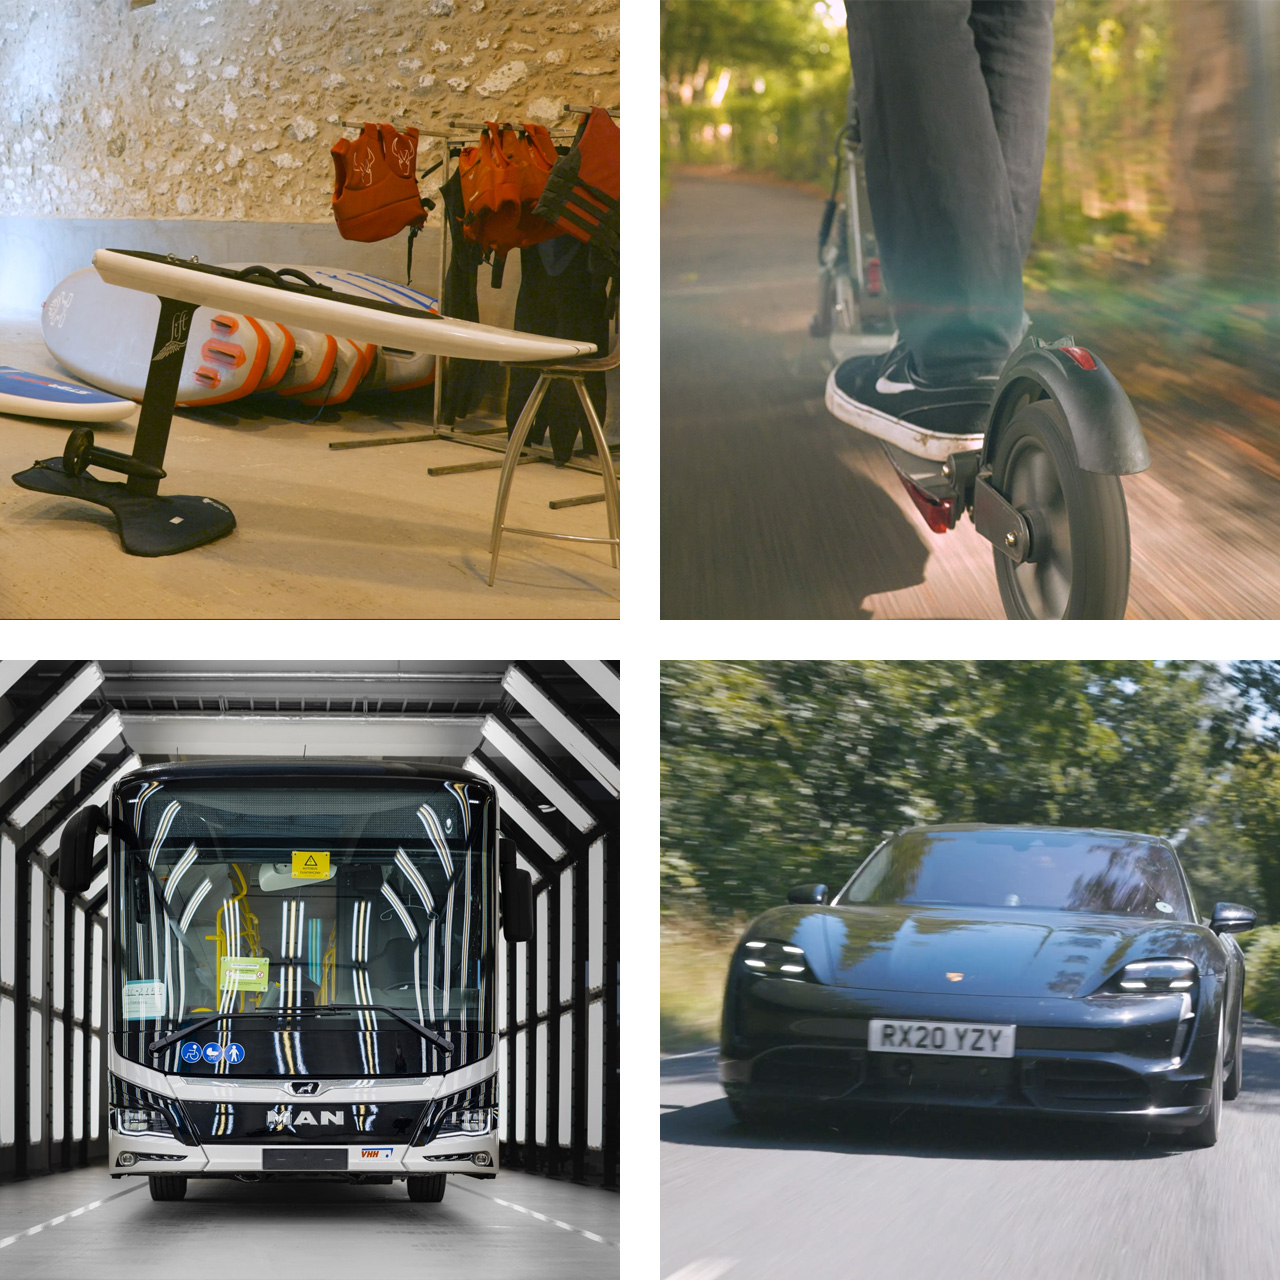 Covering the full range of electric transportation and leisure products